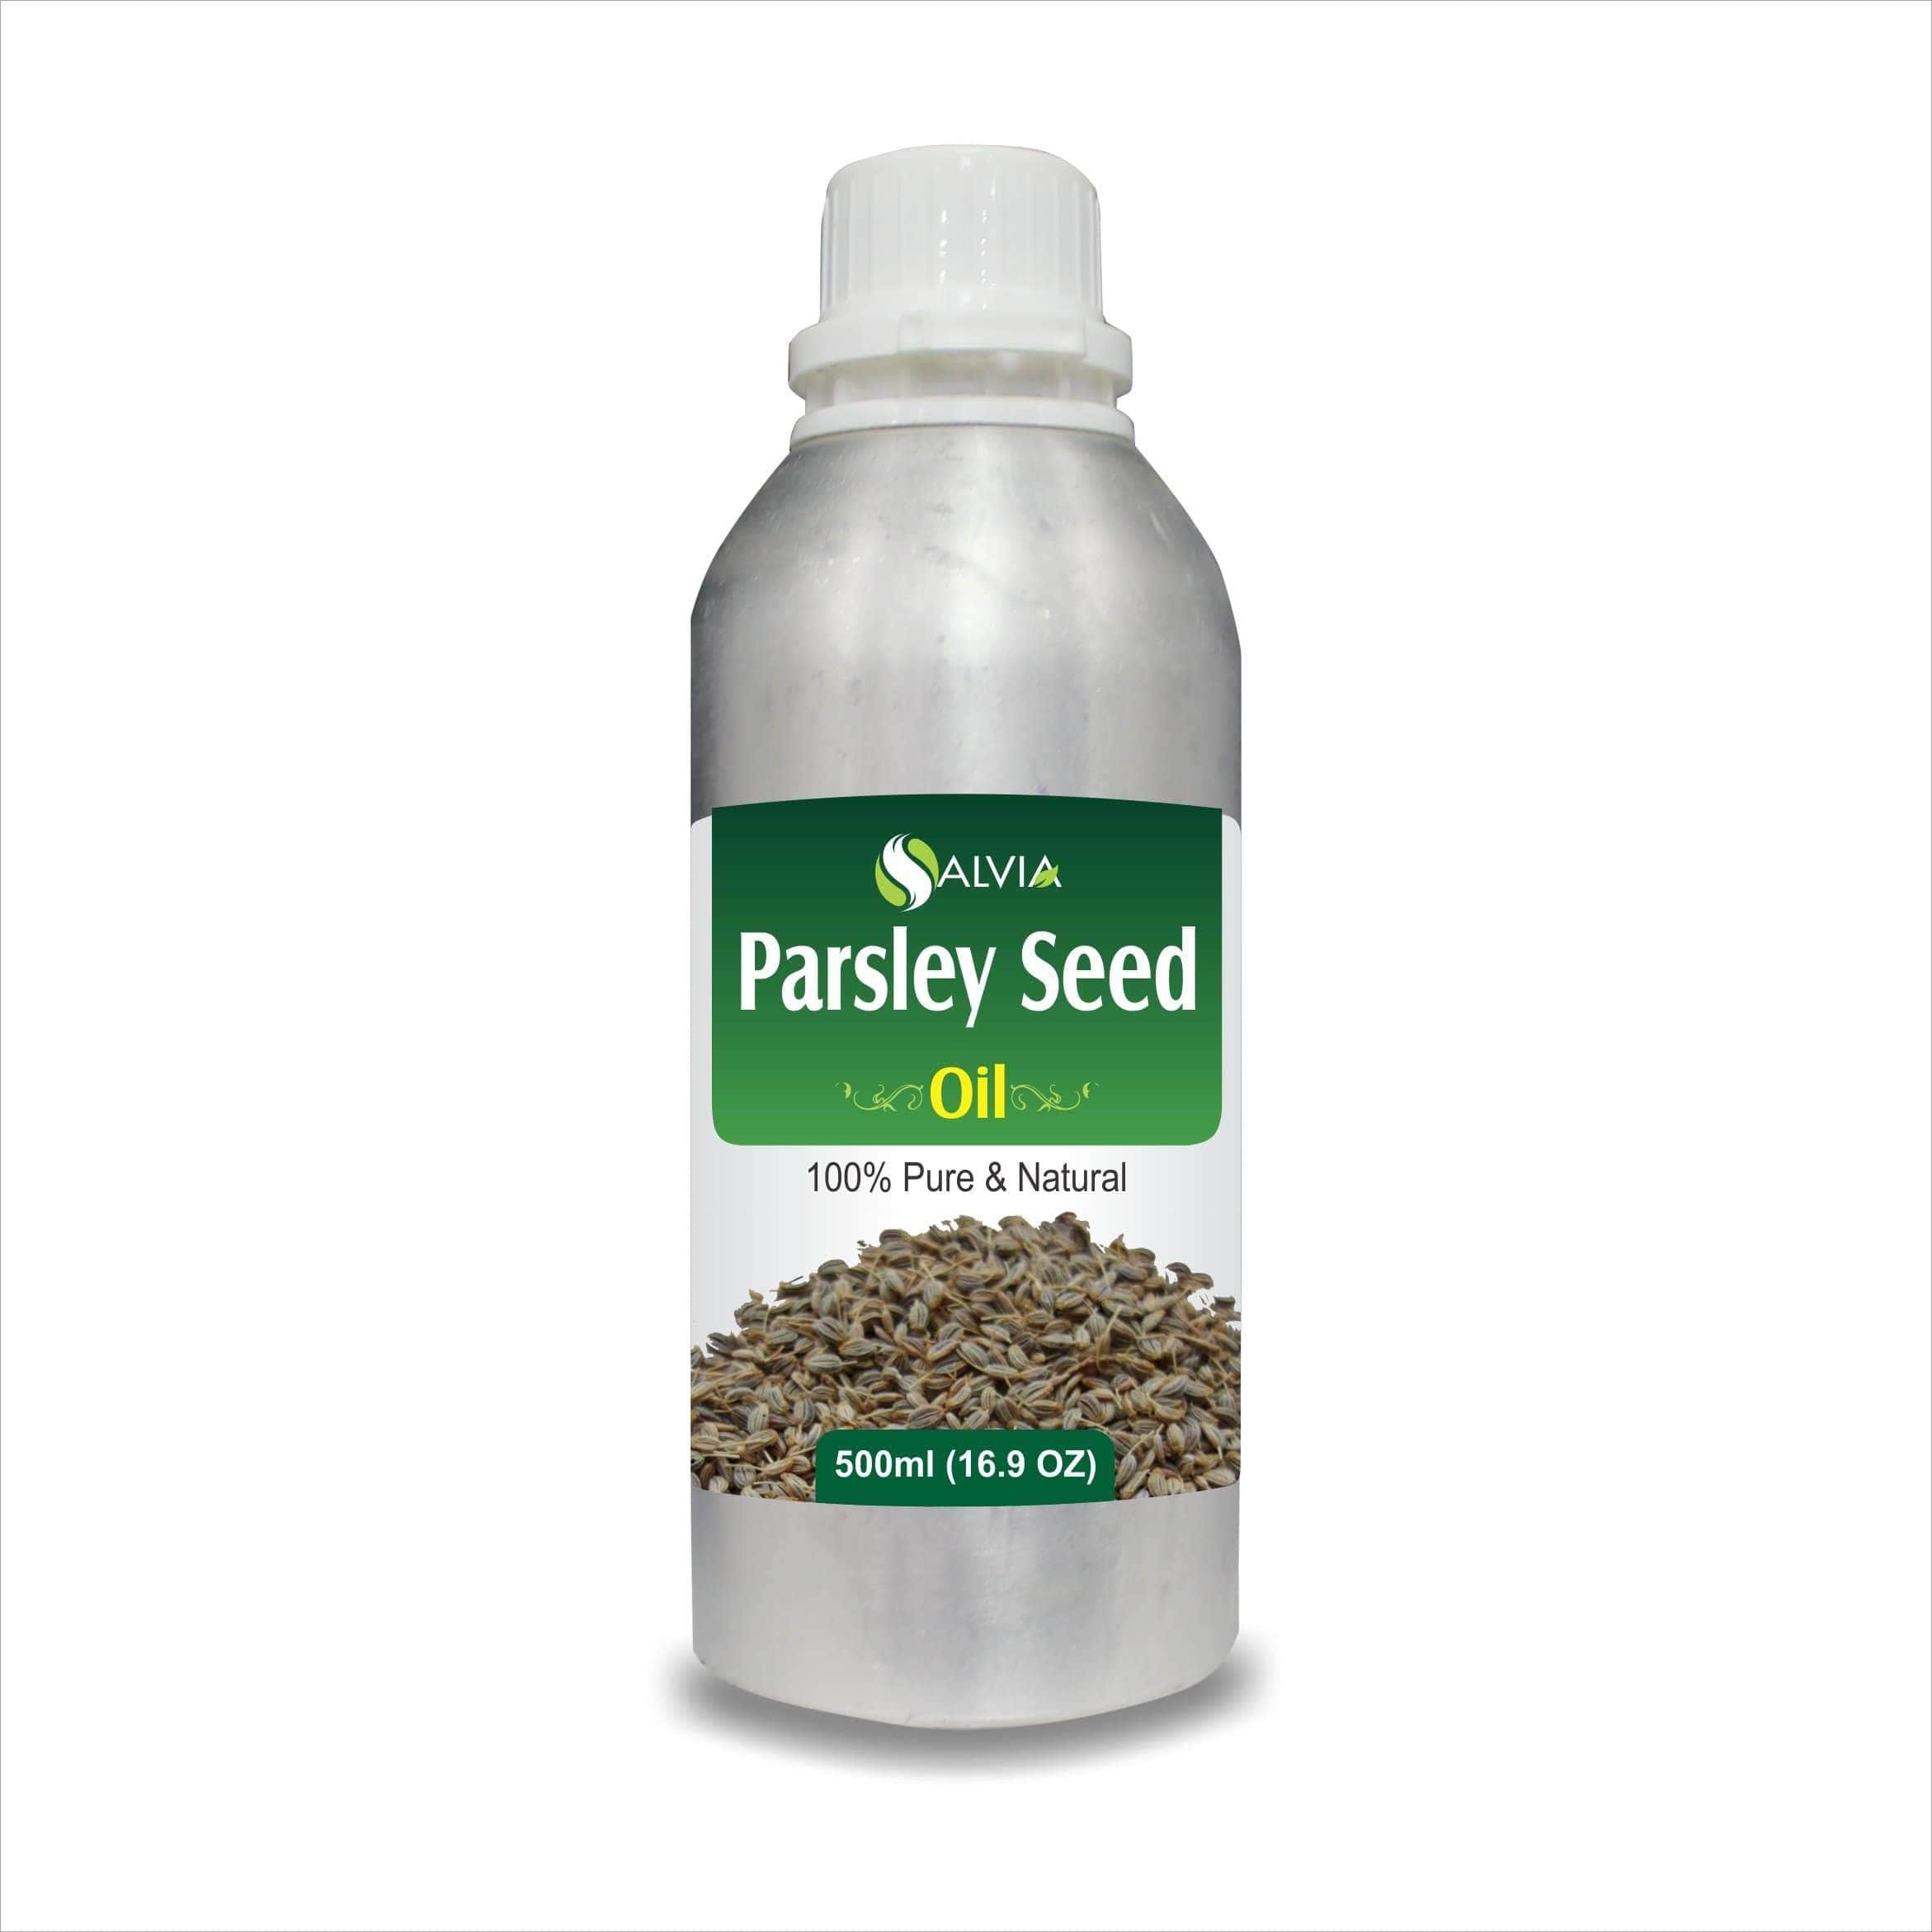 Parsley Seed Oil benefits